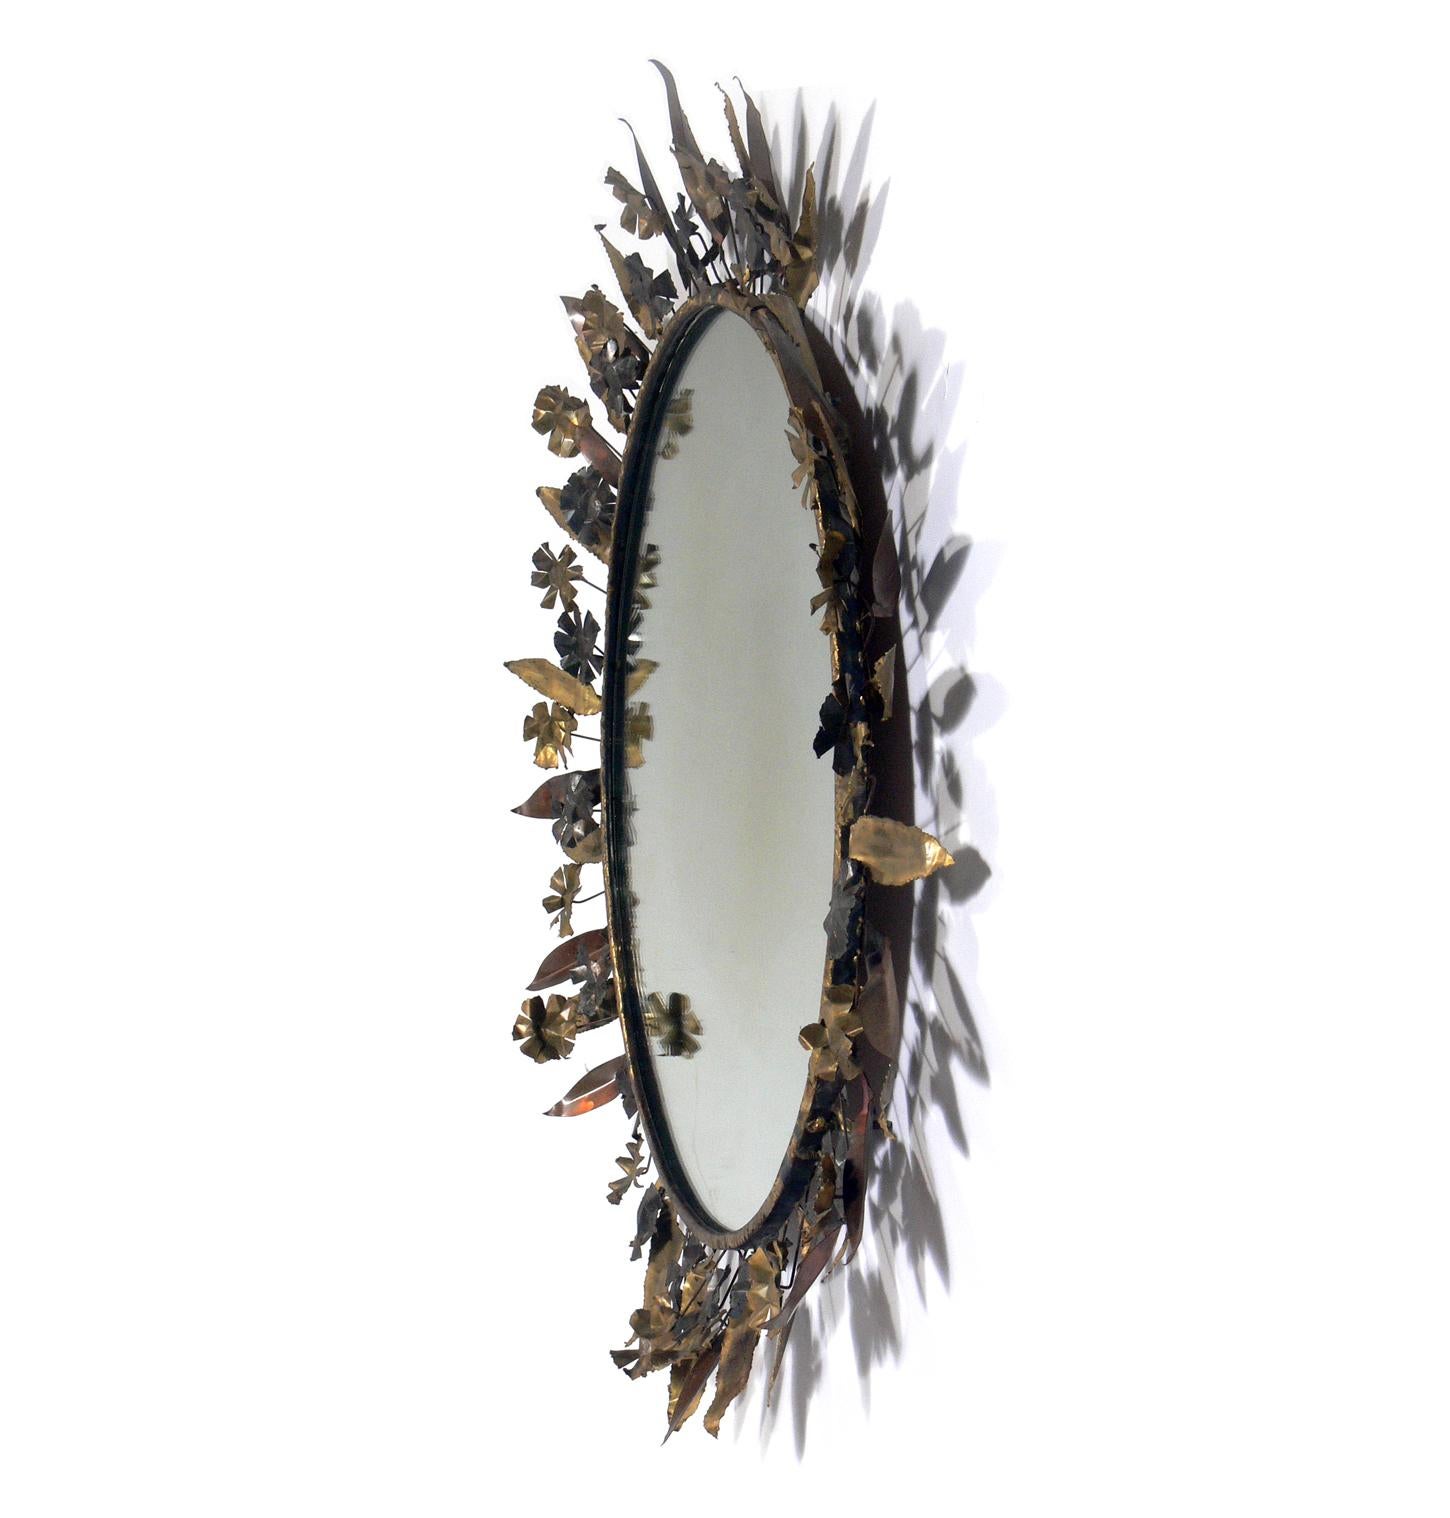 Sculptural metal flowers and leaves mirror, in the manner of Line Vautrin, C. Jere, et al. Probably American, circa 1960s. Retains warm original patina.